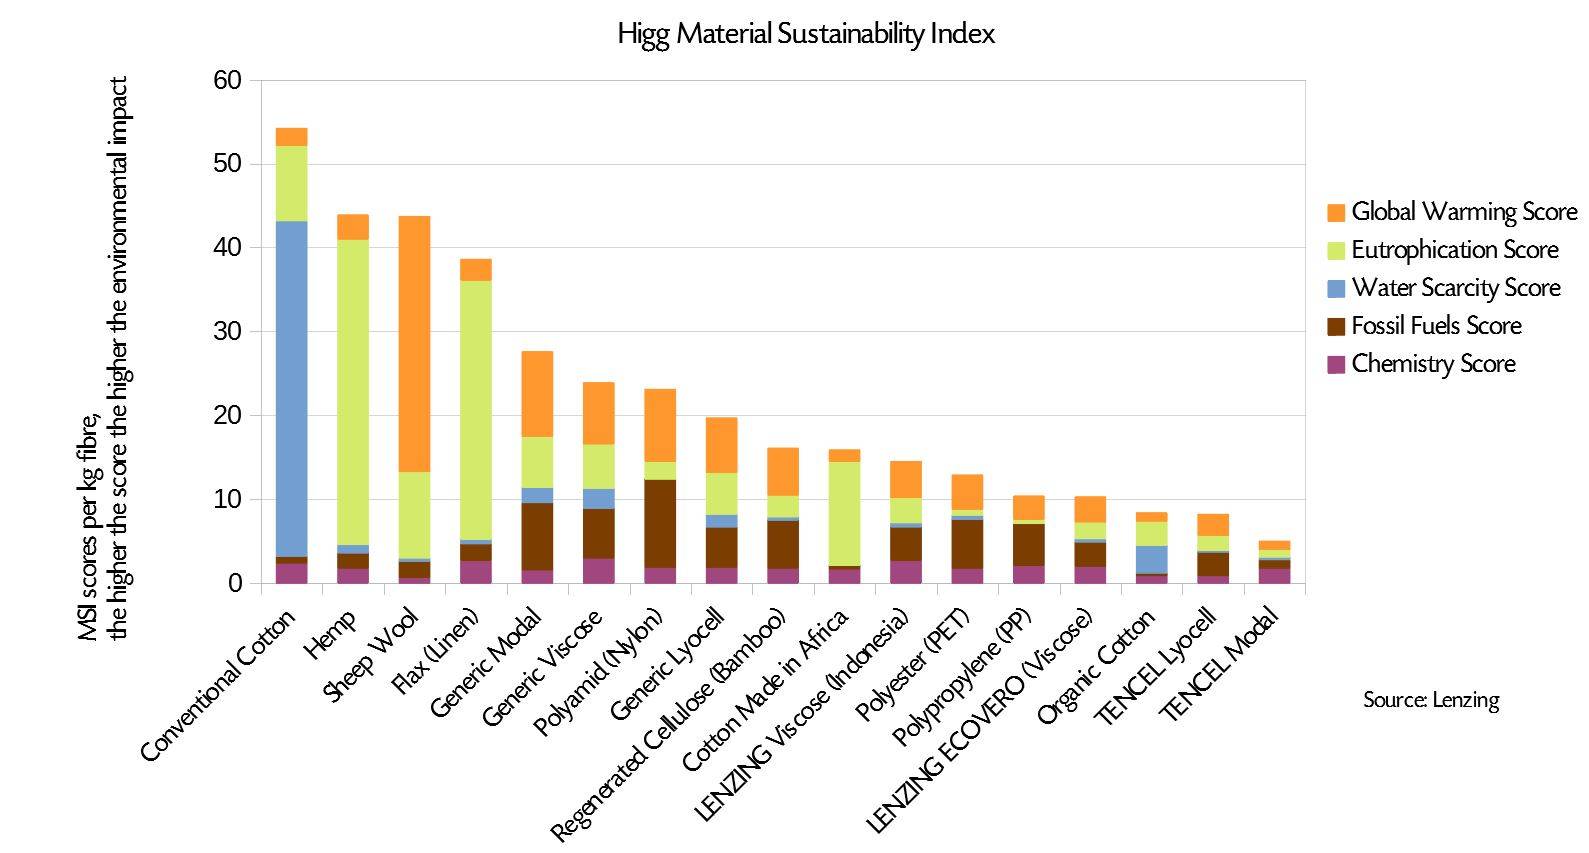 Higg material sustainability index chart